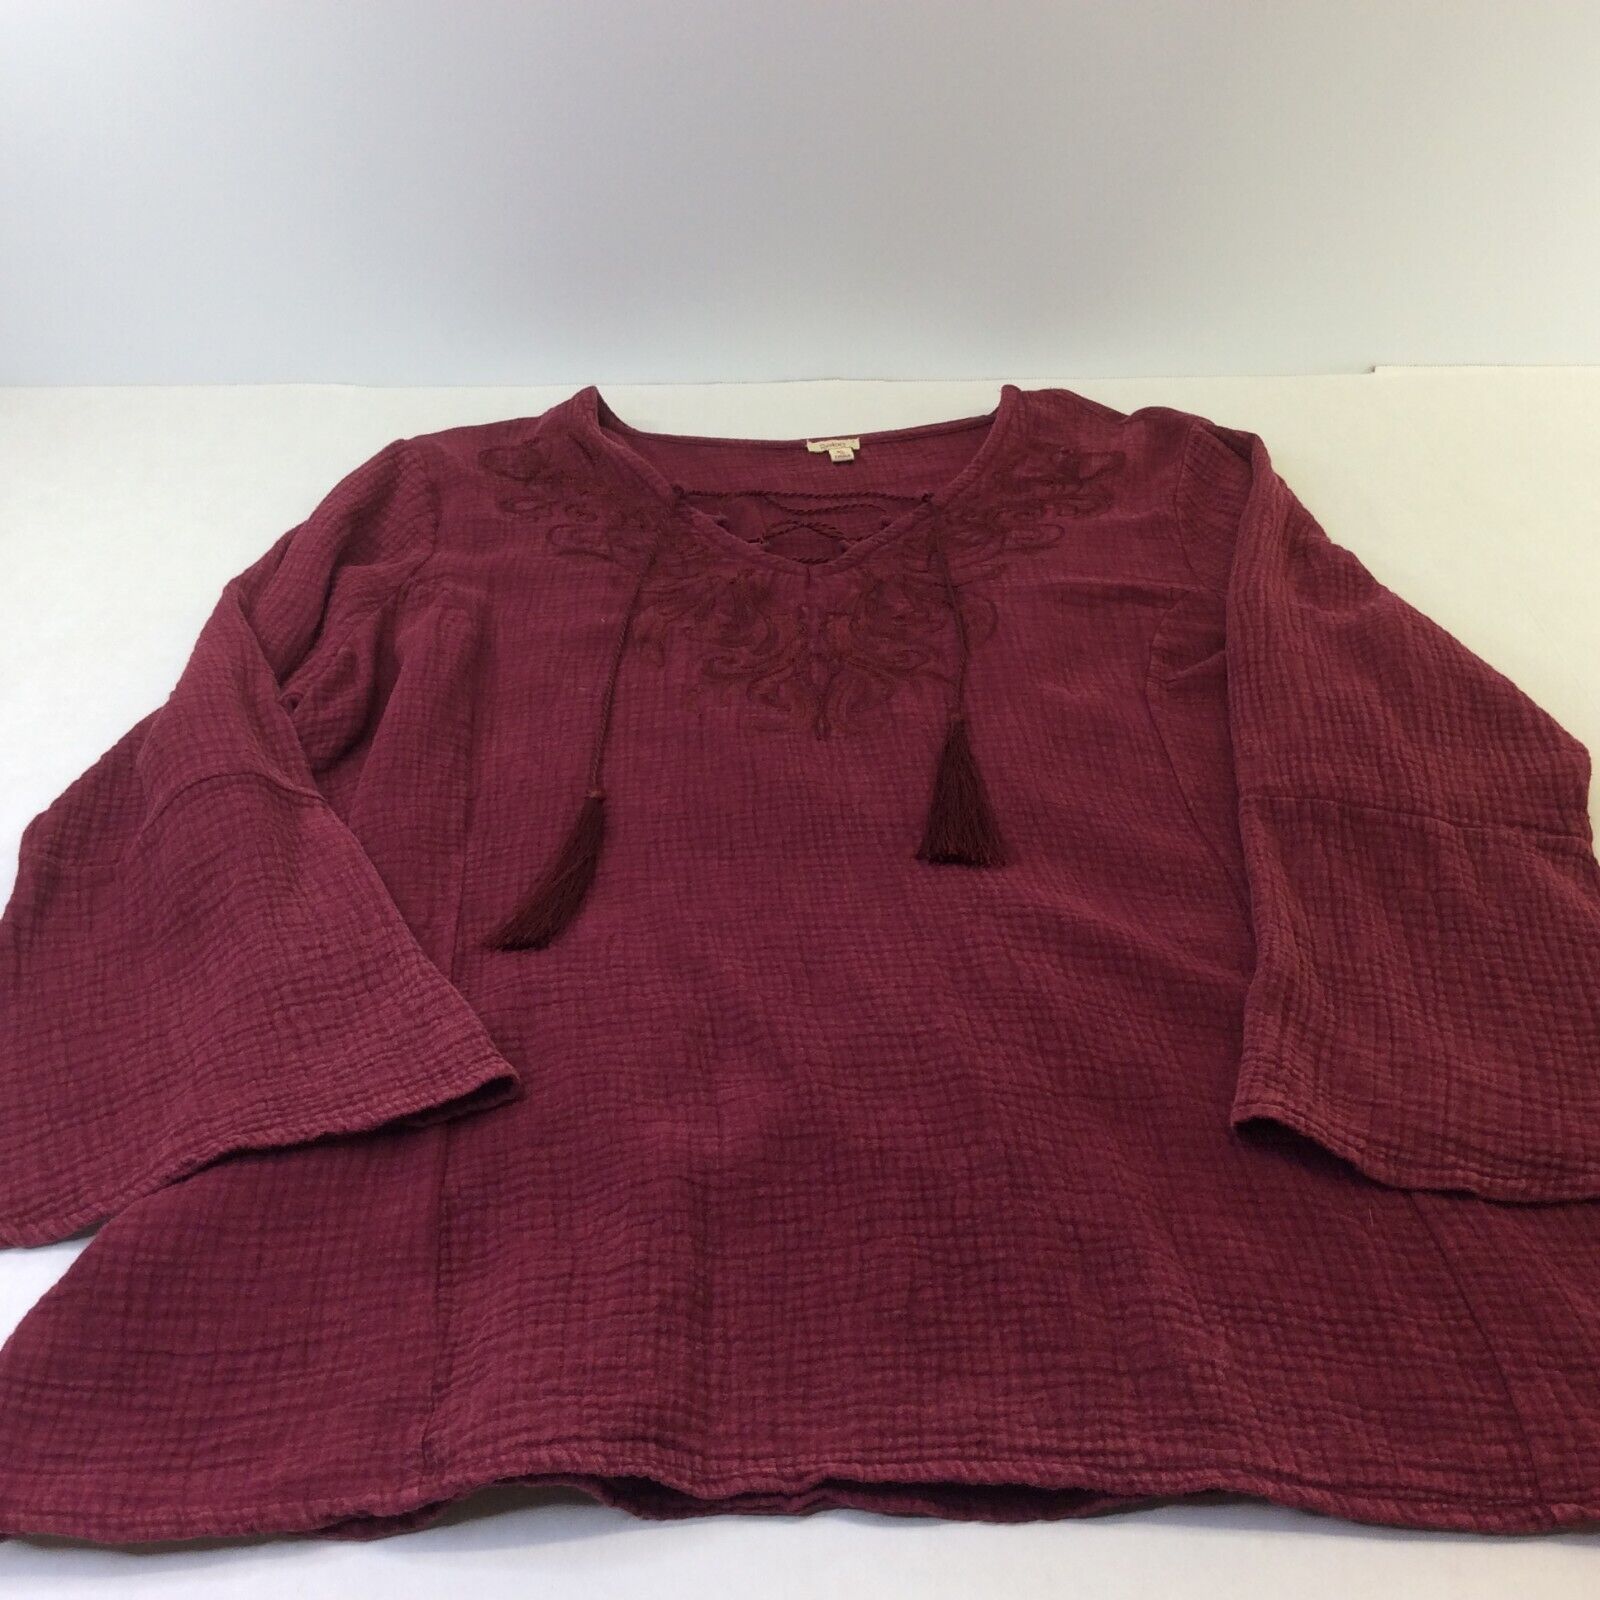 Primary image for Reba Blouse Top XL Pullover Maroon Tassels Bell Sleeves Gathered Back Cotton